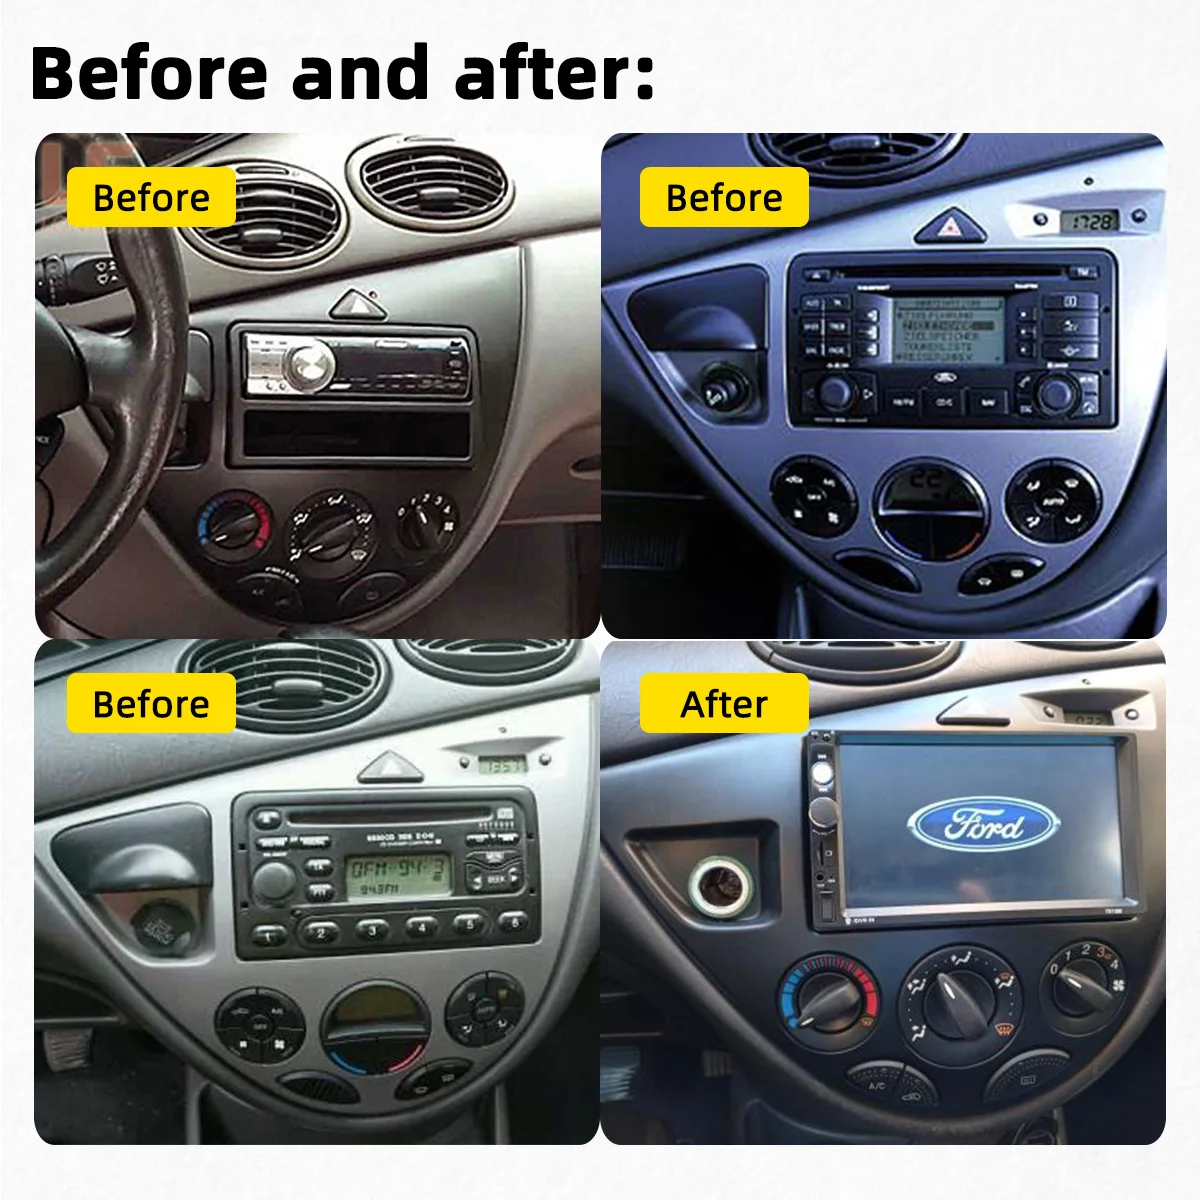 https://ae01.alicdn.com/kf/S8fb75a2327354871a334f715469be77cz/Car-Radio-2-Din-Android-Stereo-for-Ford-Fiesta-1995-2001-Focus-MK1-1998-2004-Car.jpg